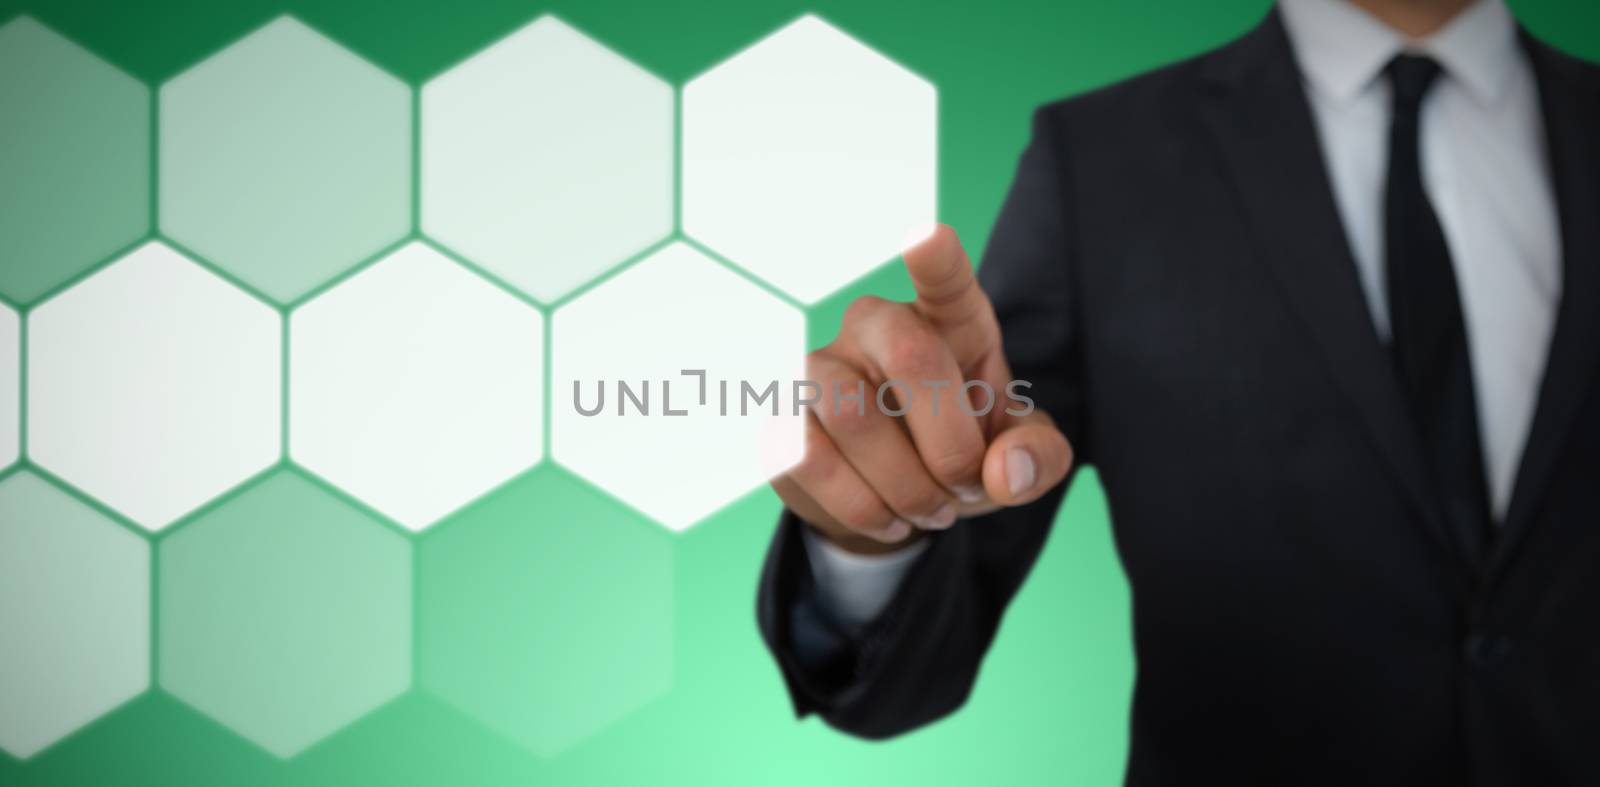 Mid section of businessman with pointing gesture against abstract green background